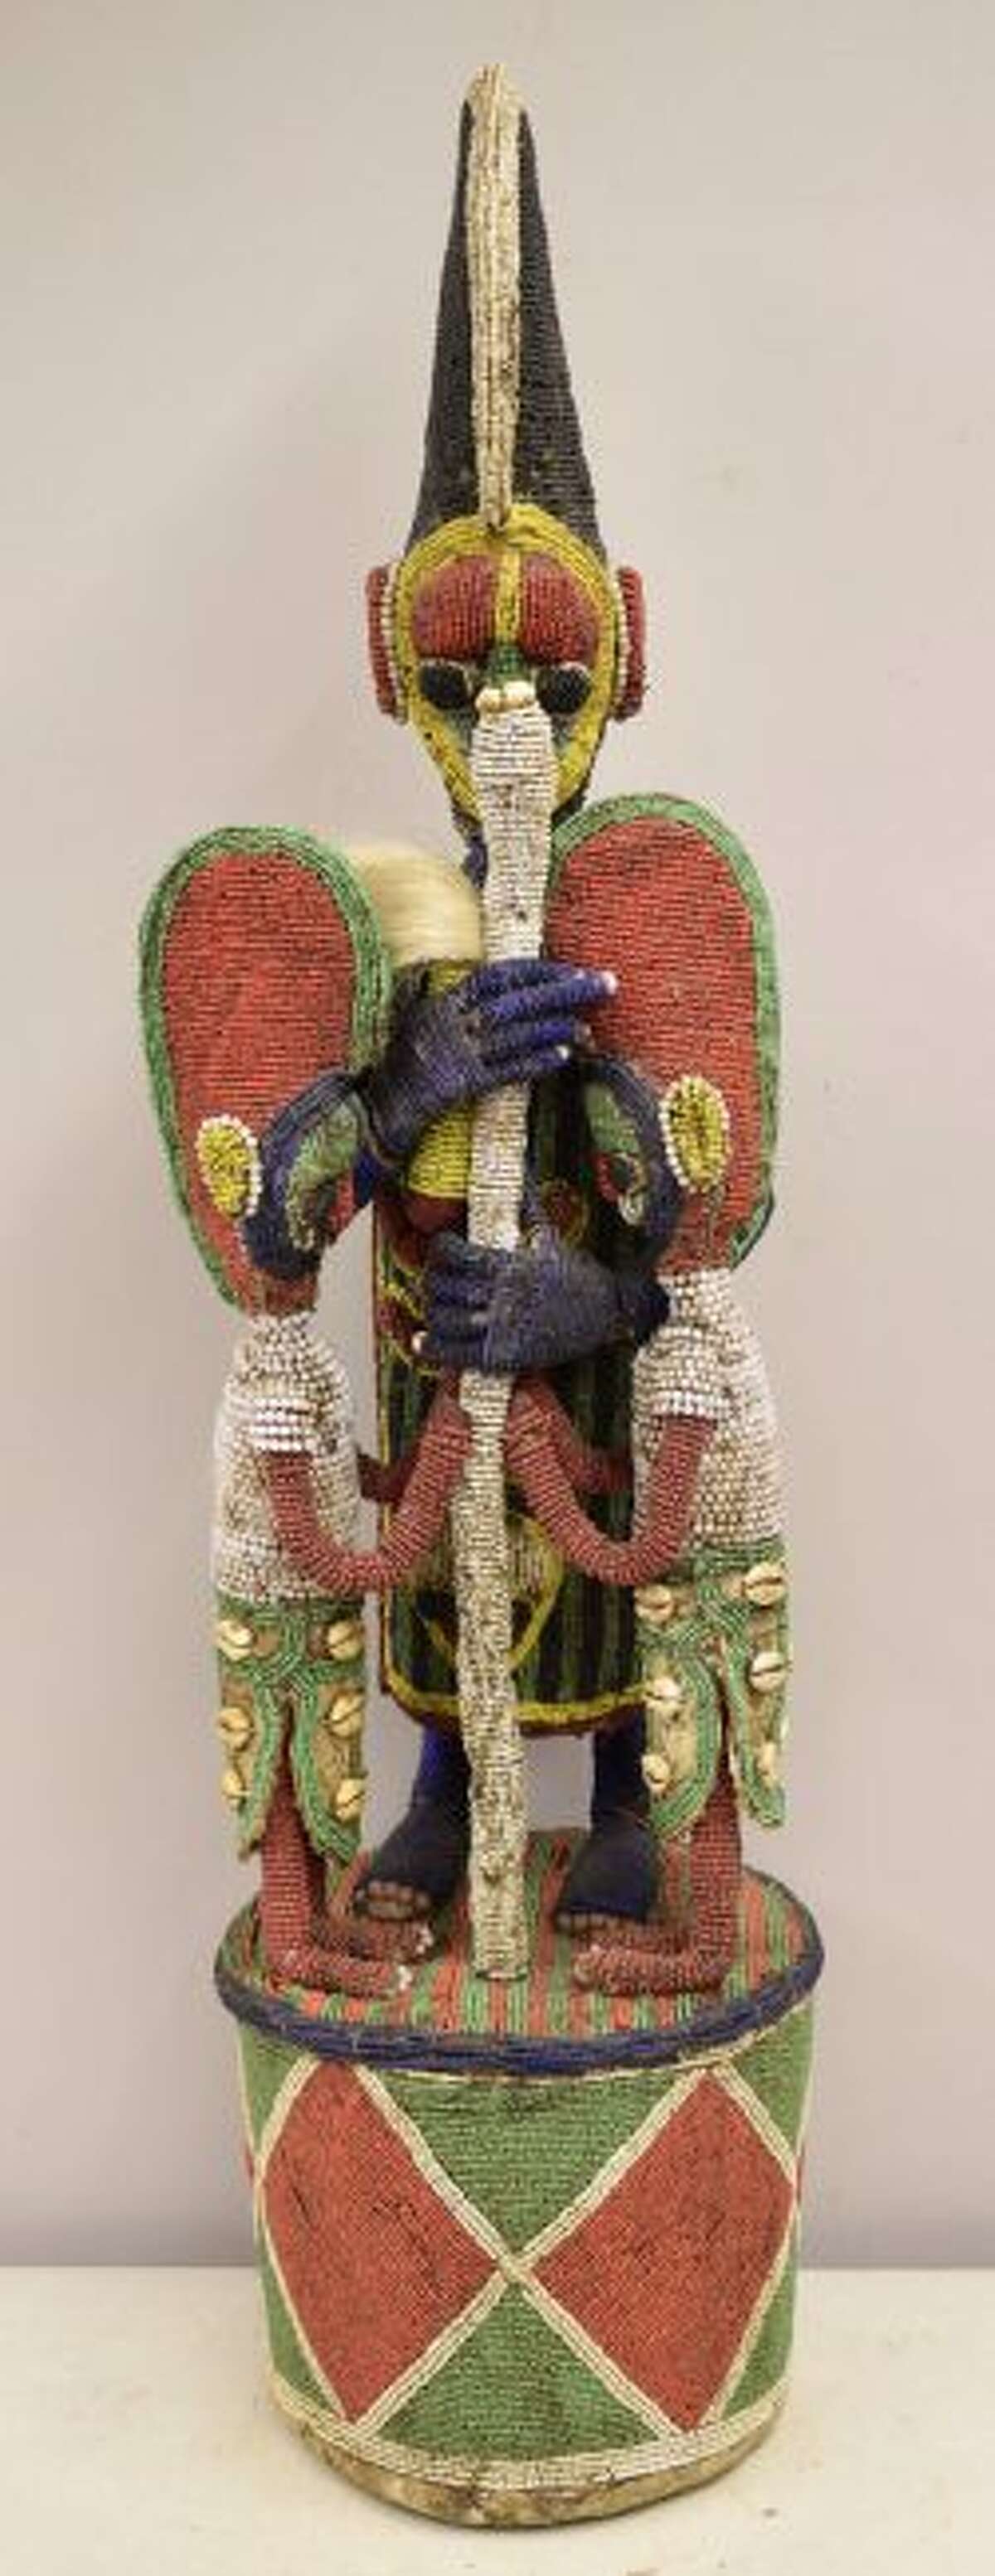 A Yoruba Crown will be one of the exhibits during the West Shore Community College’s exhibit of African masks, figurative sculpture, weavings, and artifacts at the Manierre Dawson Gallery. Gallery hours are Monday through Thursday, 9 a.m. to 4 p.m., Friday, 9 a.m. to 1 p.m.